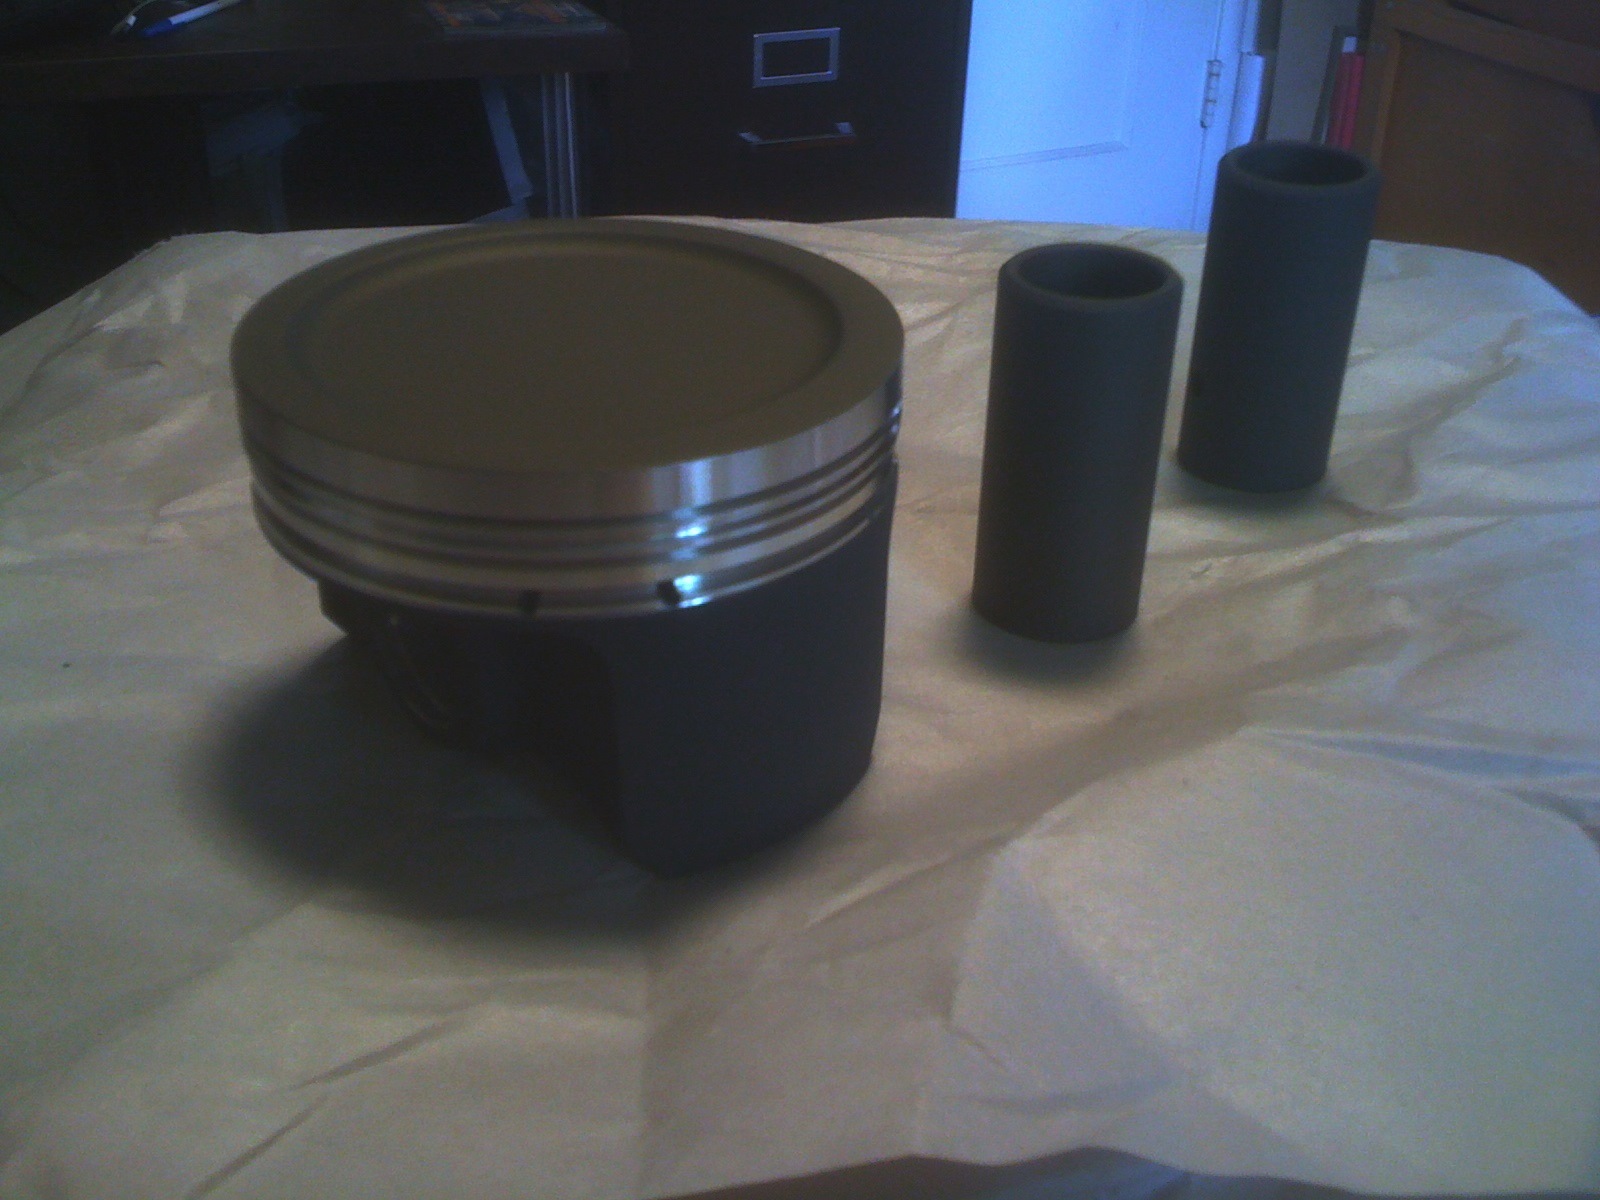 Holger's coated piston and tappet